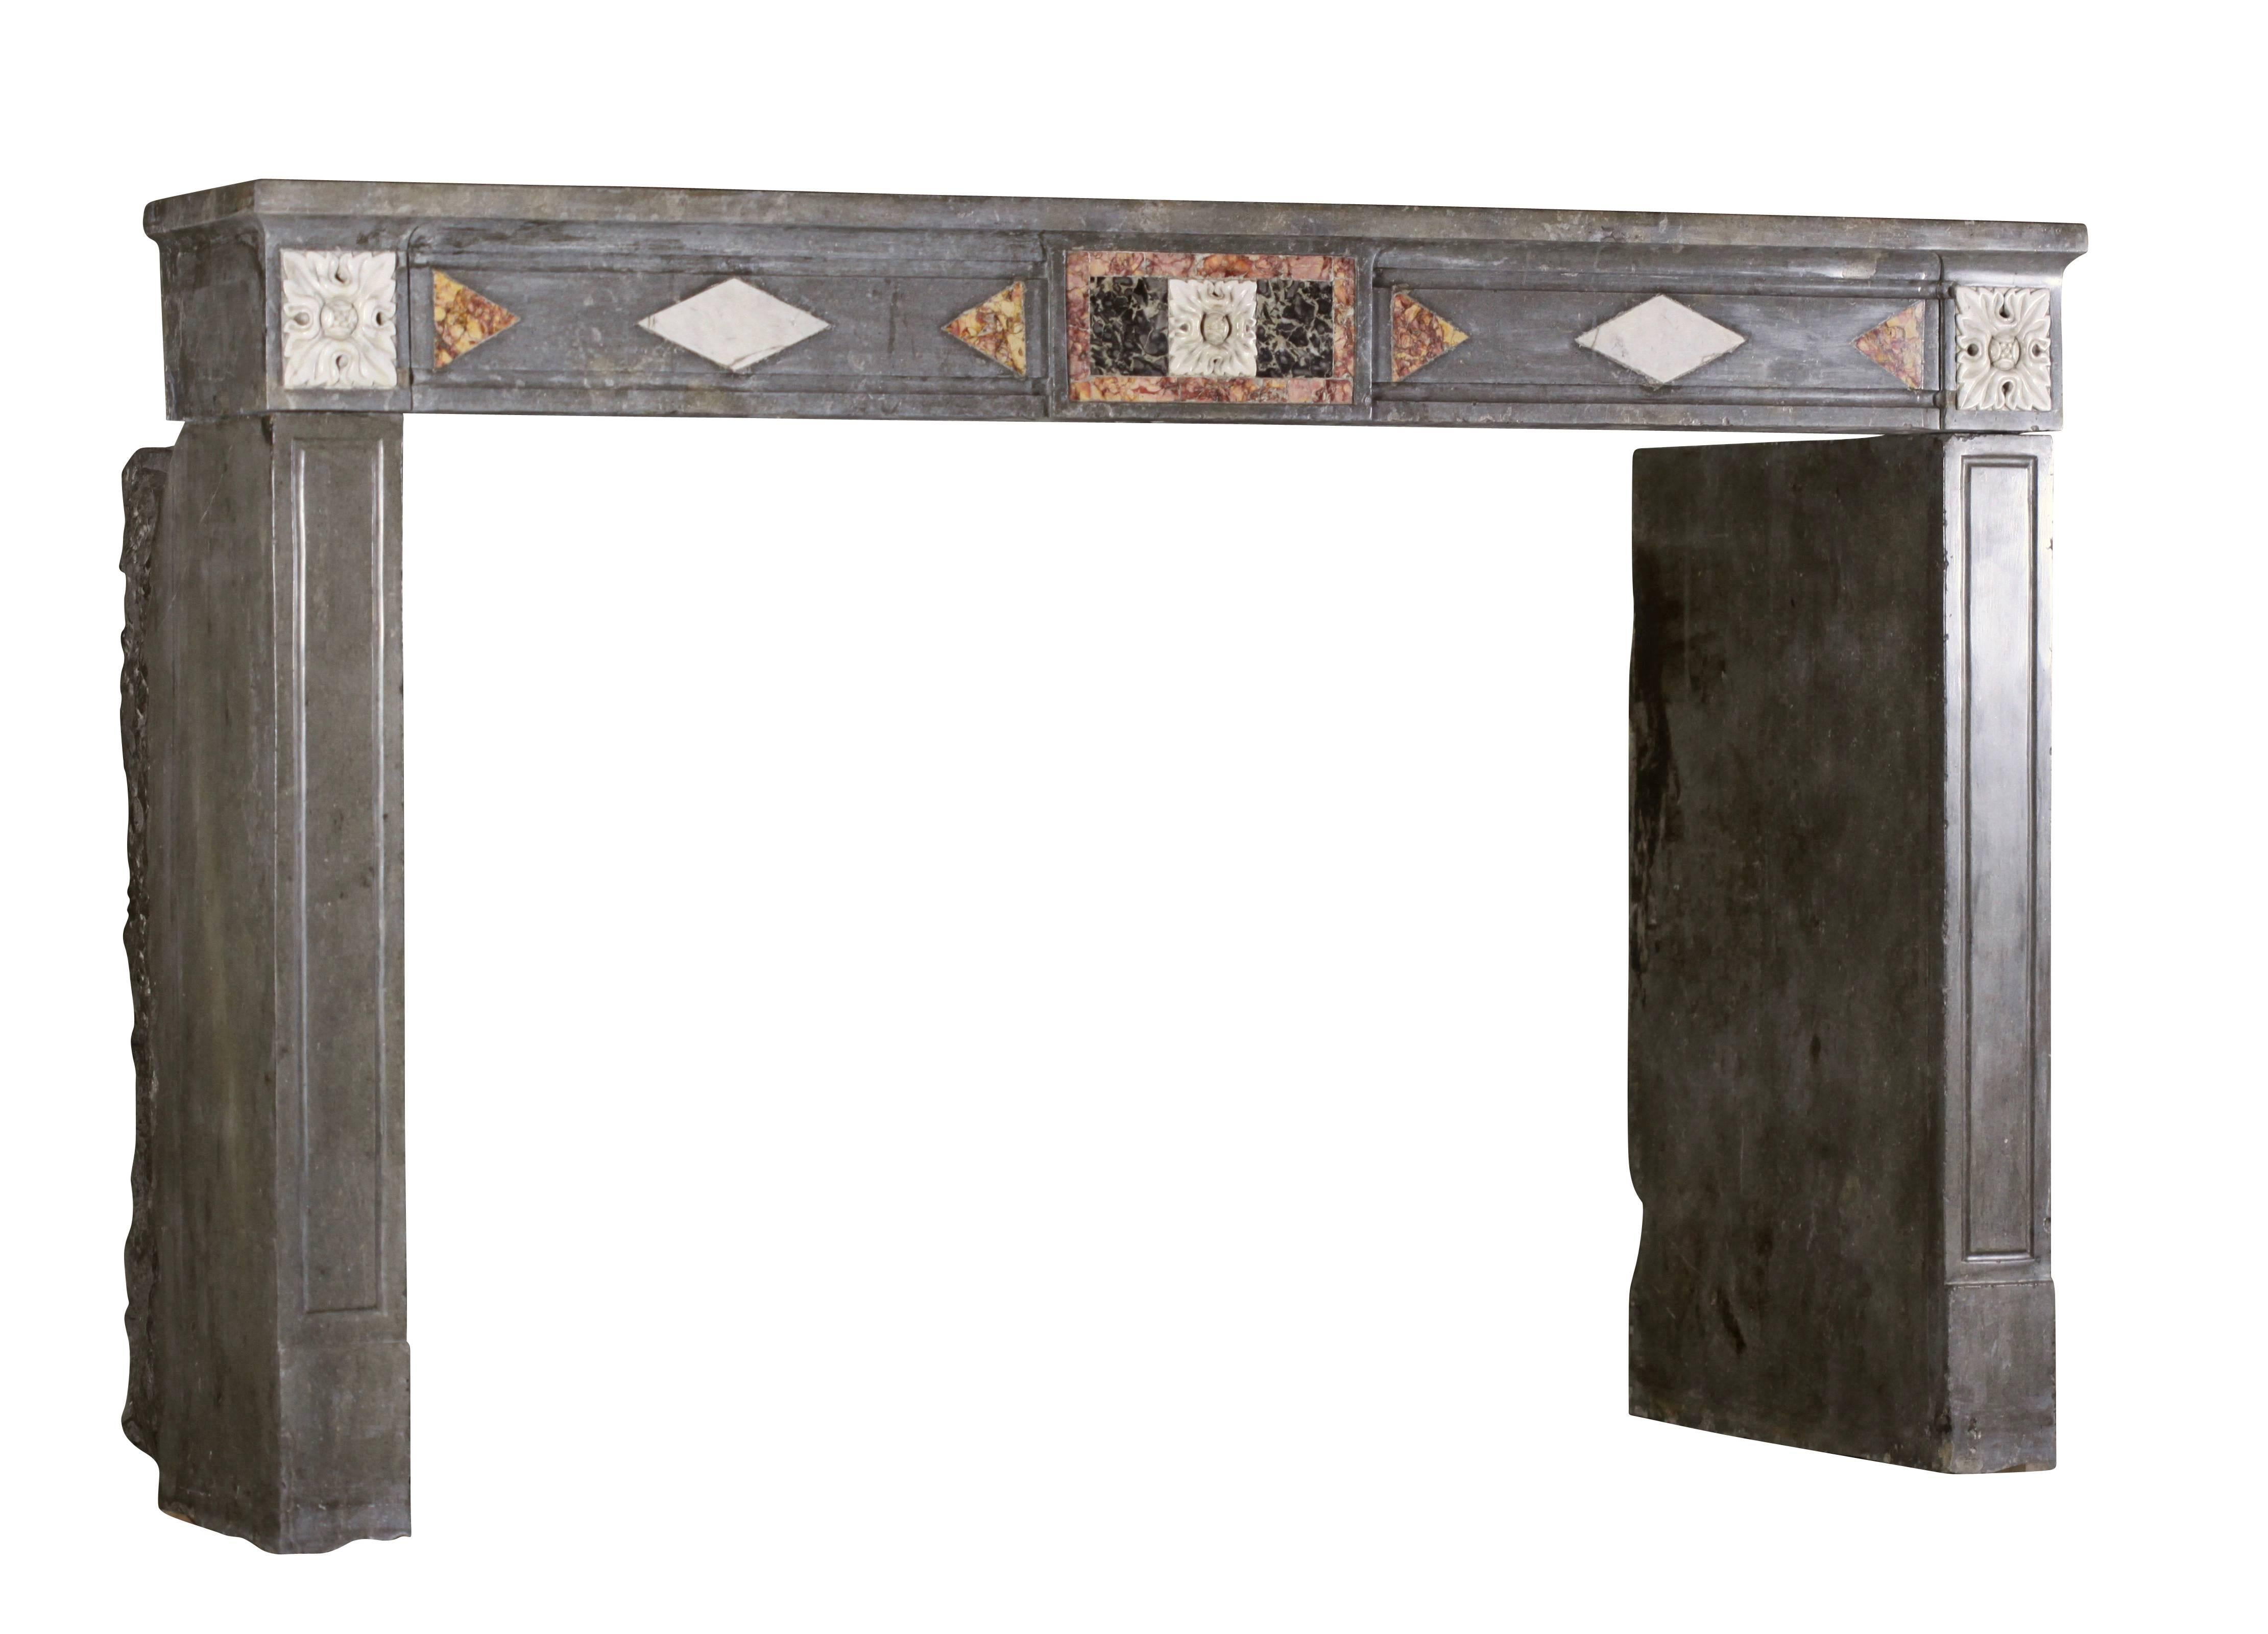 Fine European Rustic Antique Fireplace Surround with Marble Inlays For Sale 2